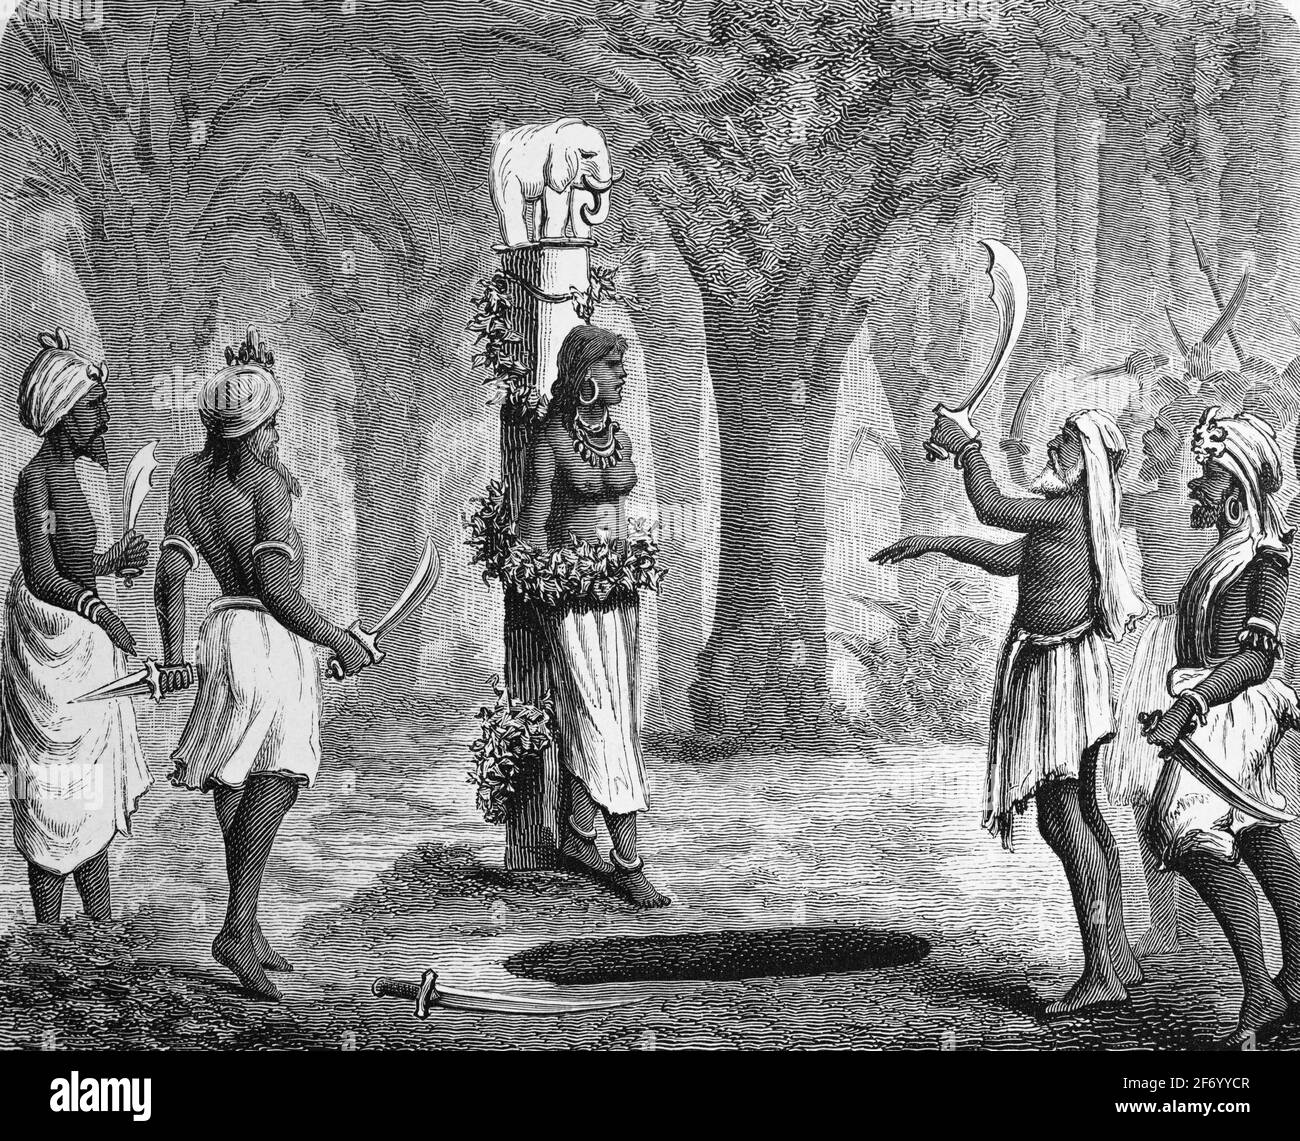 Human sacrifice among the Khonds in India: a victim (meriah) about to be  dismembered. Wood engraving by C. Krull after J. Fuchs, 186-.